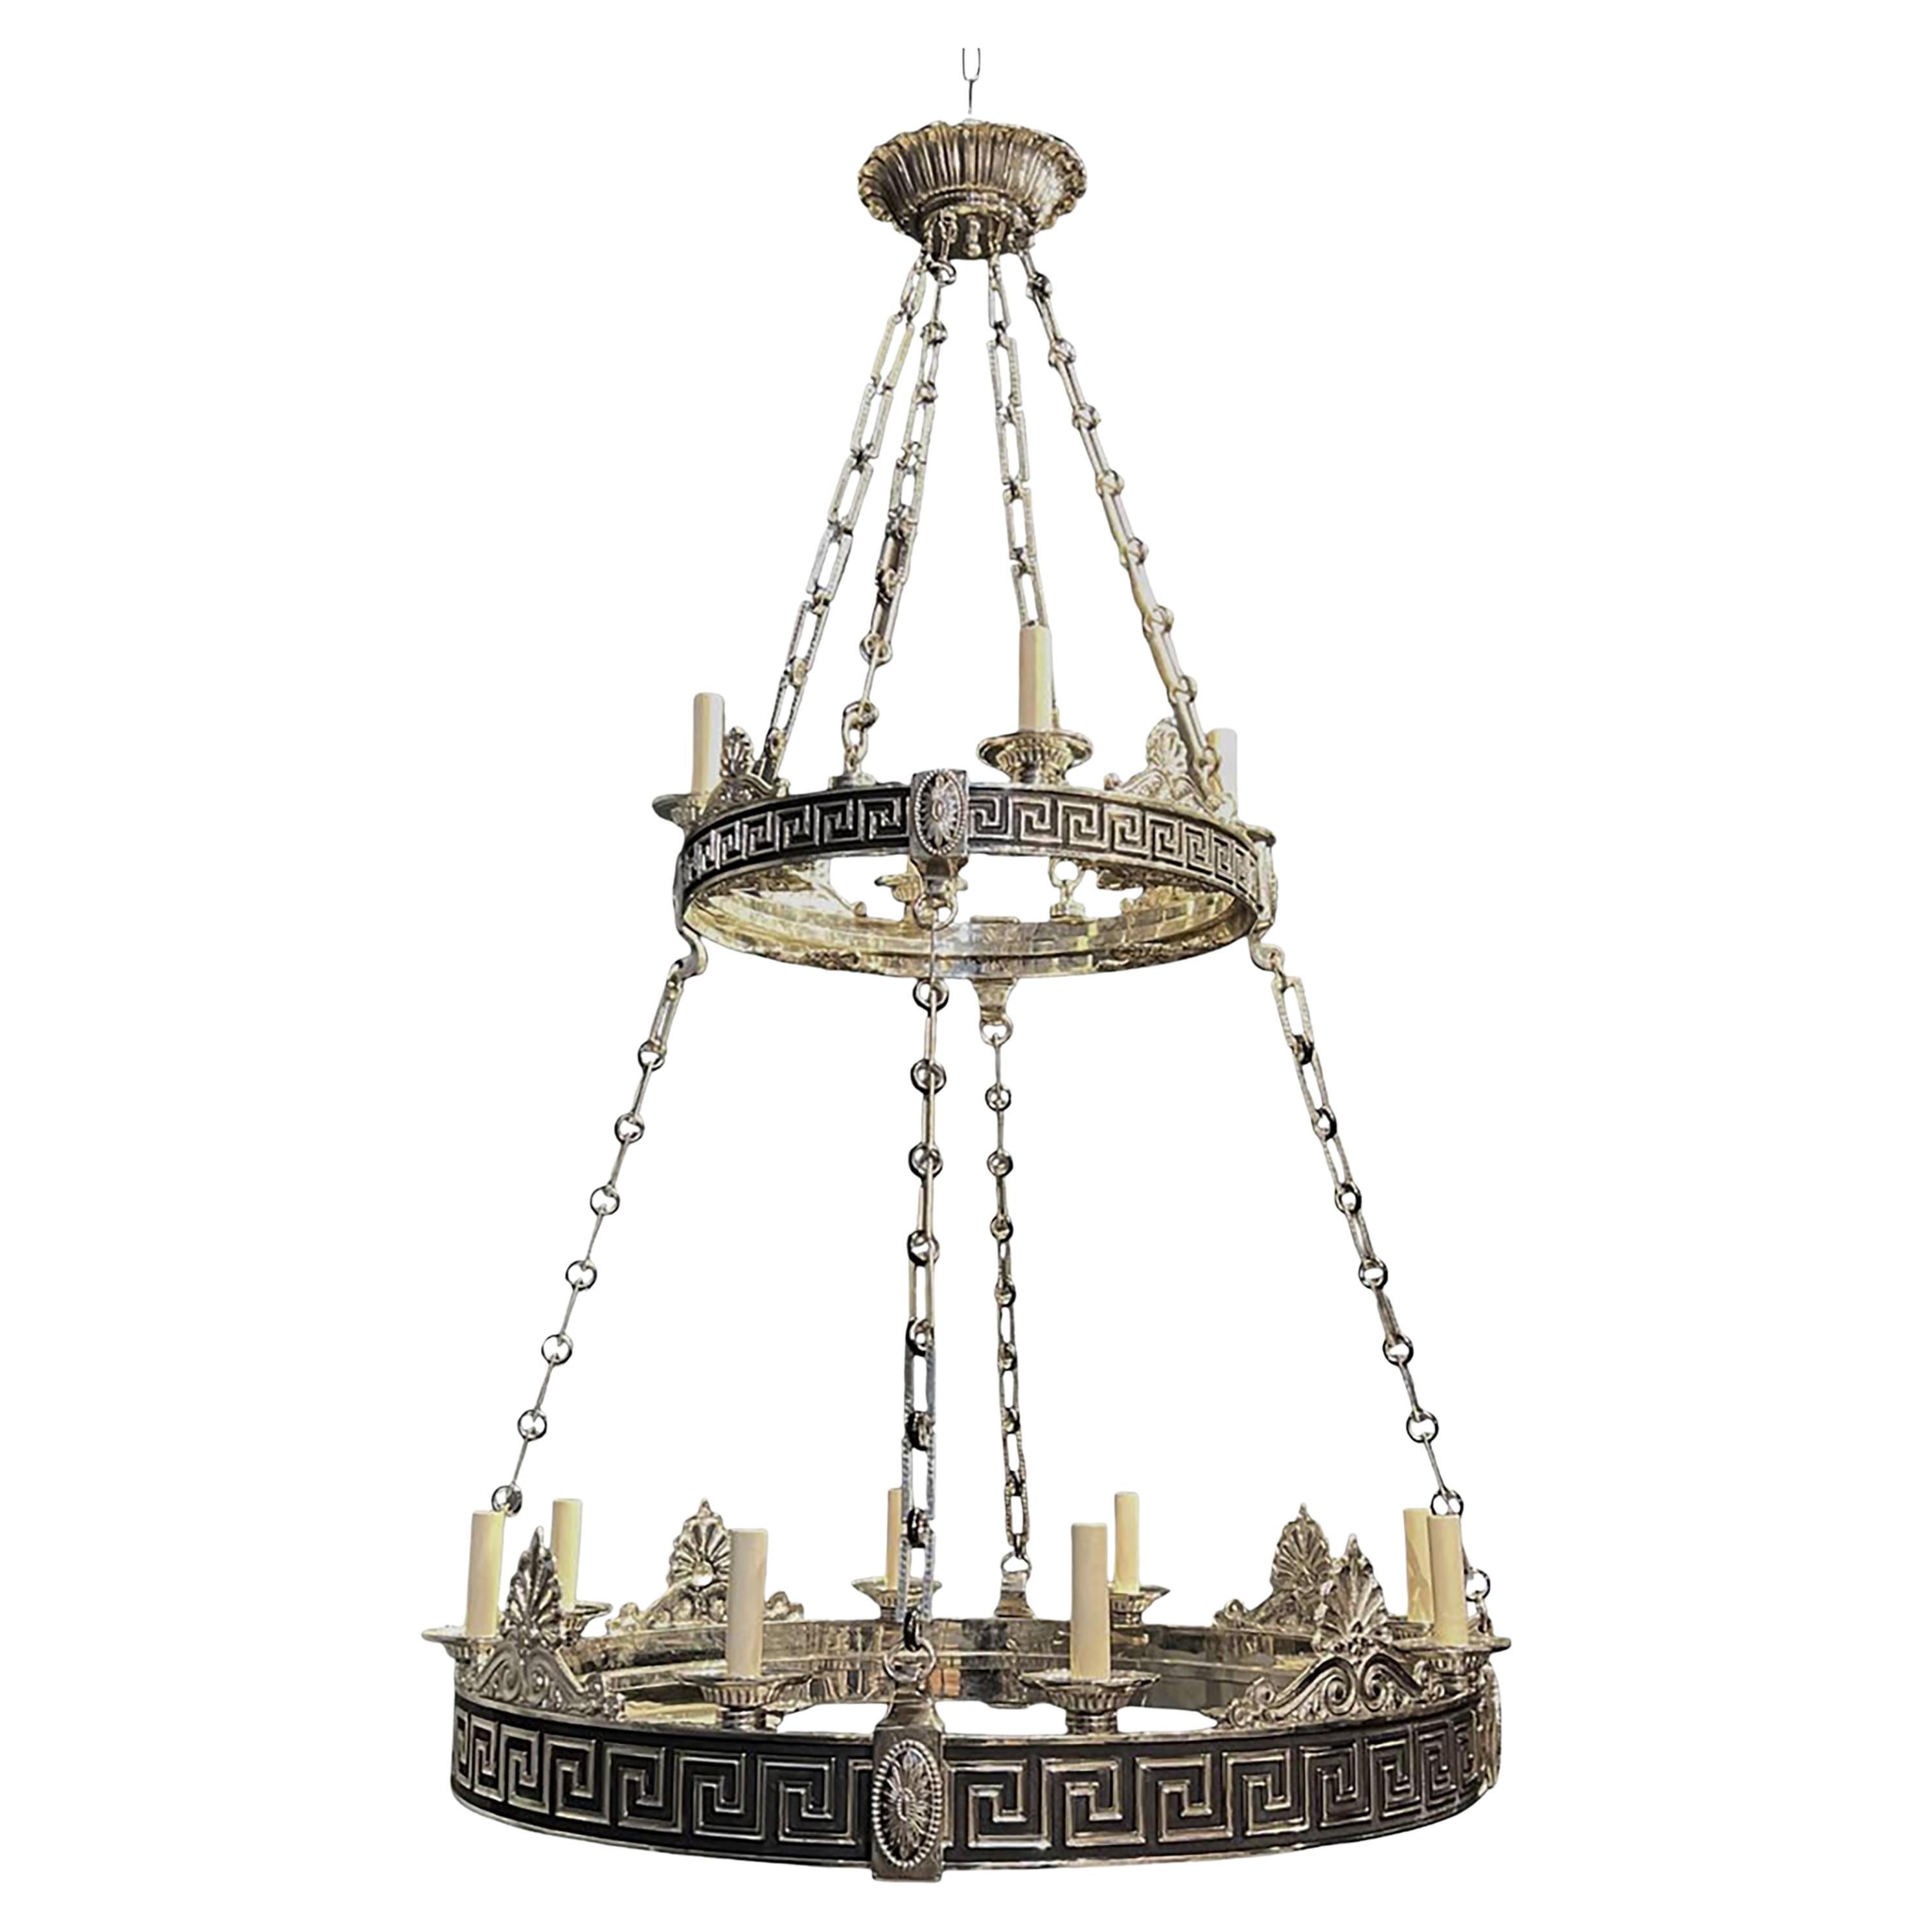 A Circa 1900 Silver Plated Neoclassic Chandelier